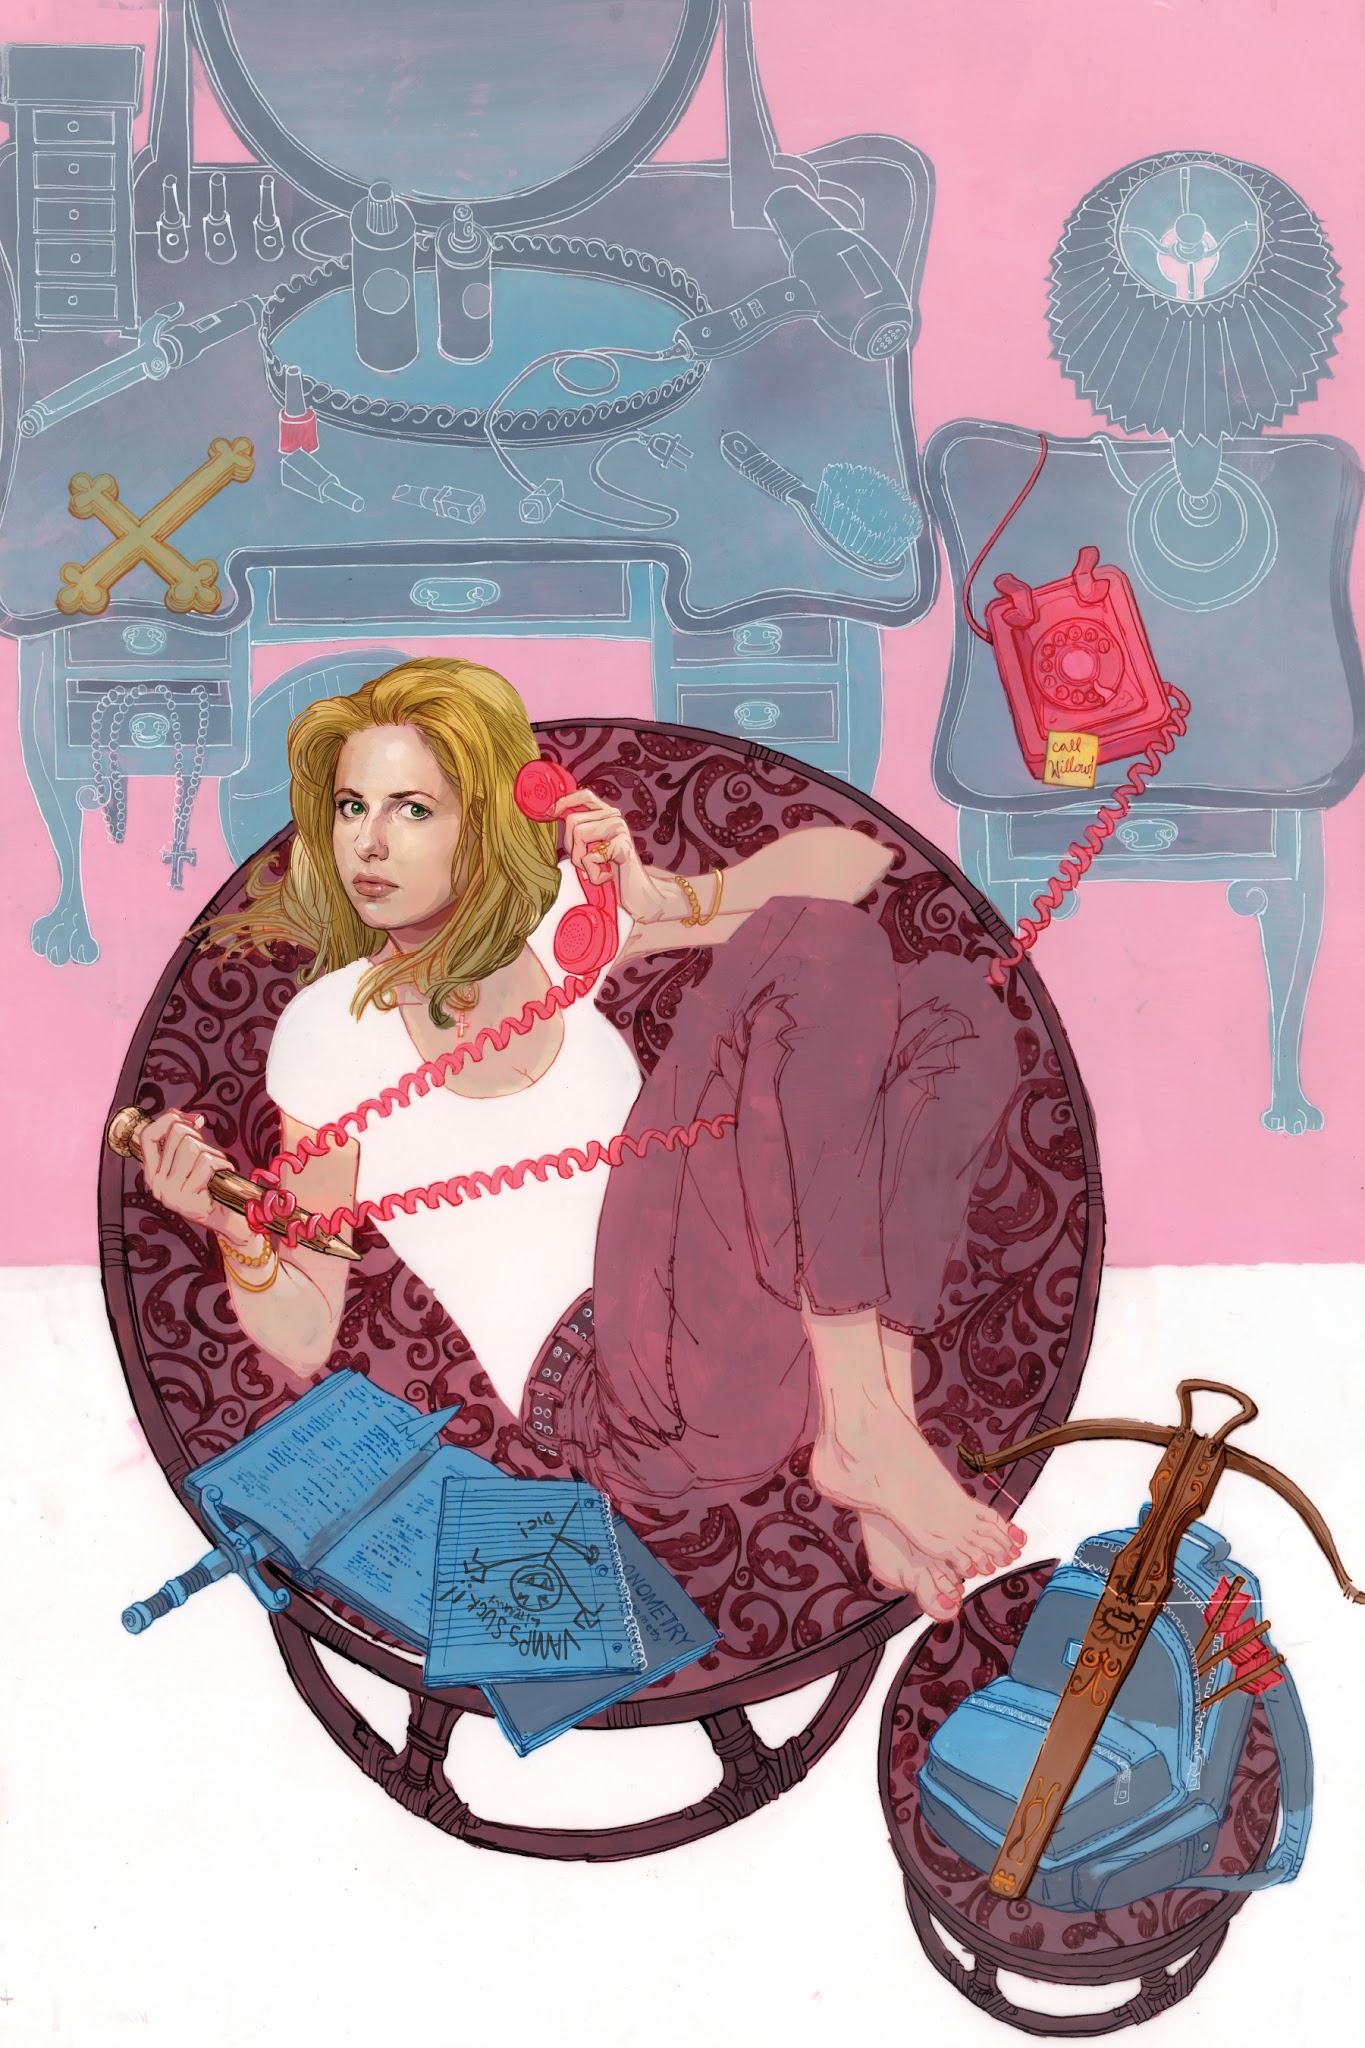 Read online Buffy: The High School Years comic -  Issue # TPB 1 - 4